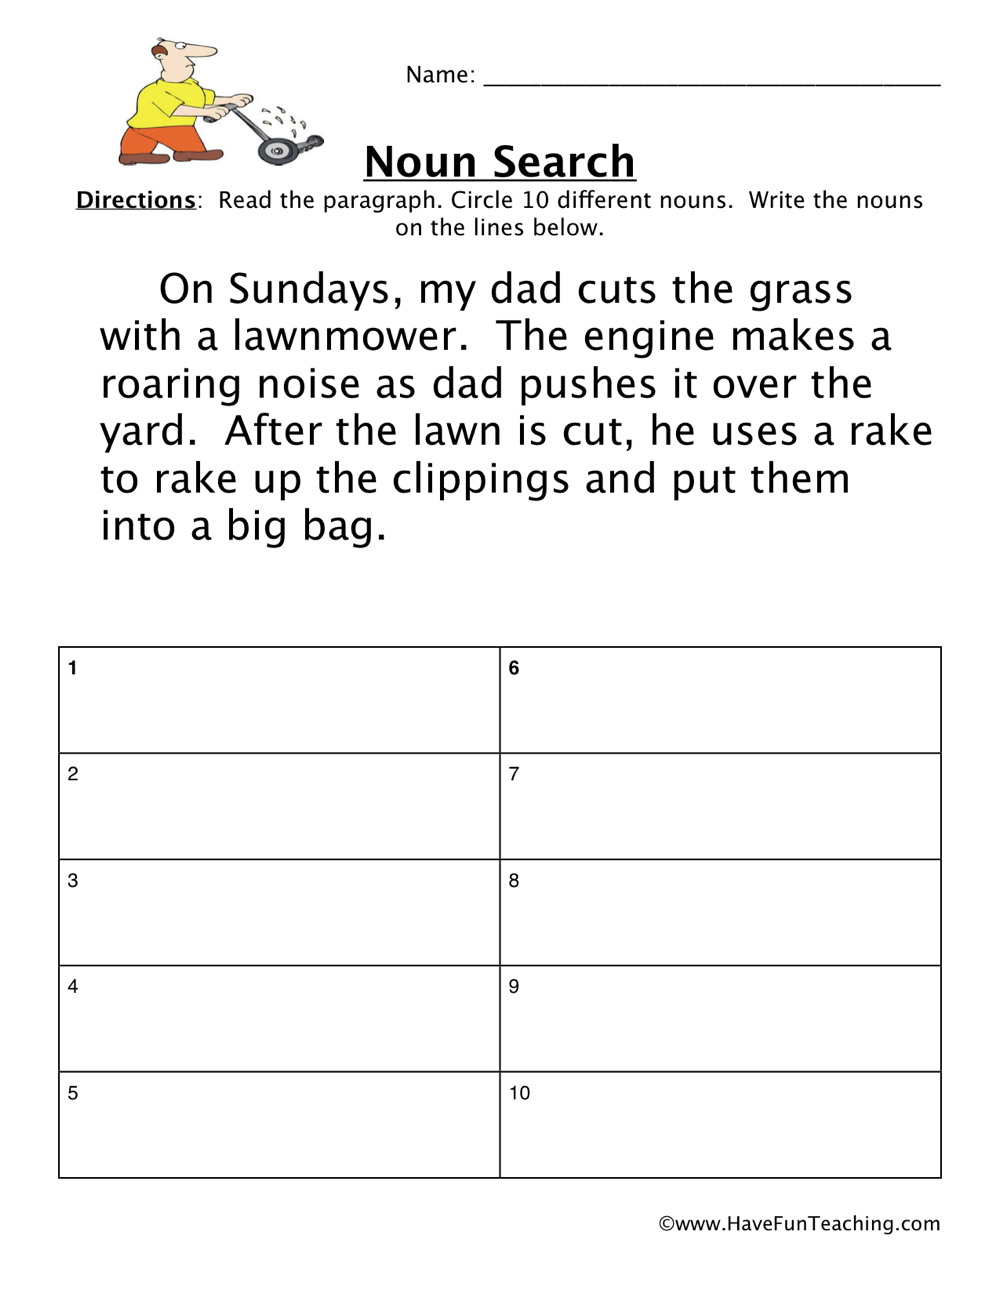 Finding Nouns In A Paragraph Worksheets For Grade 8